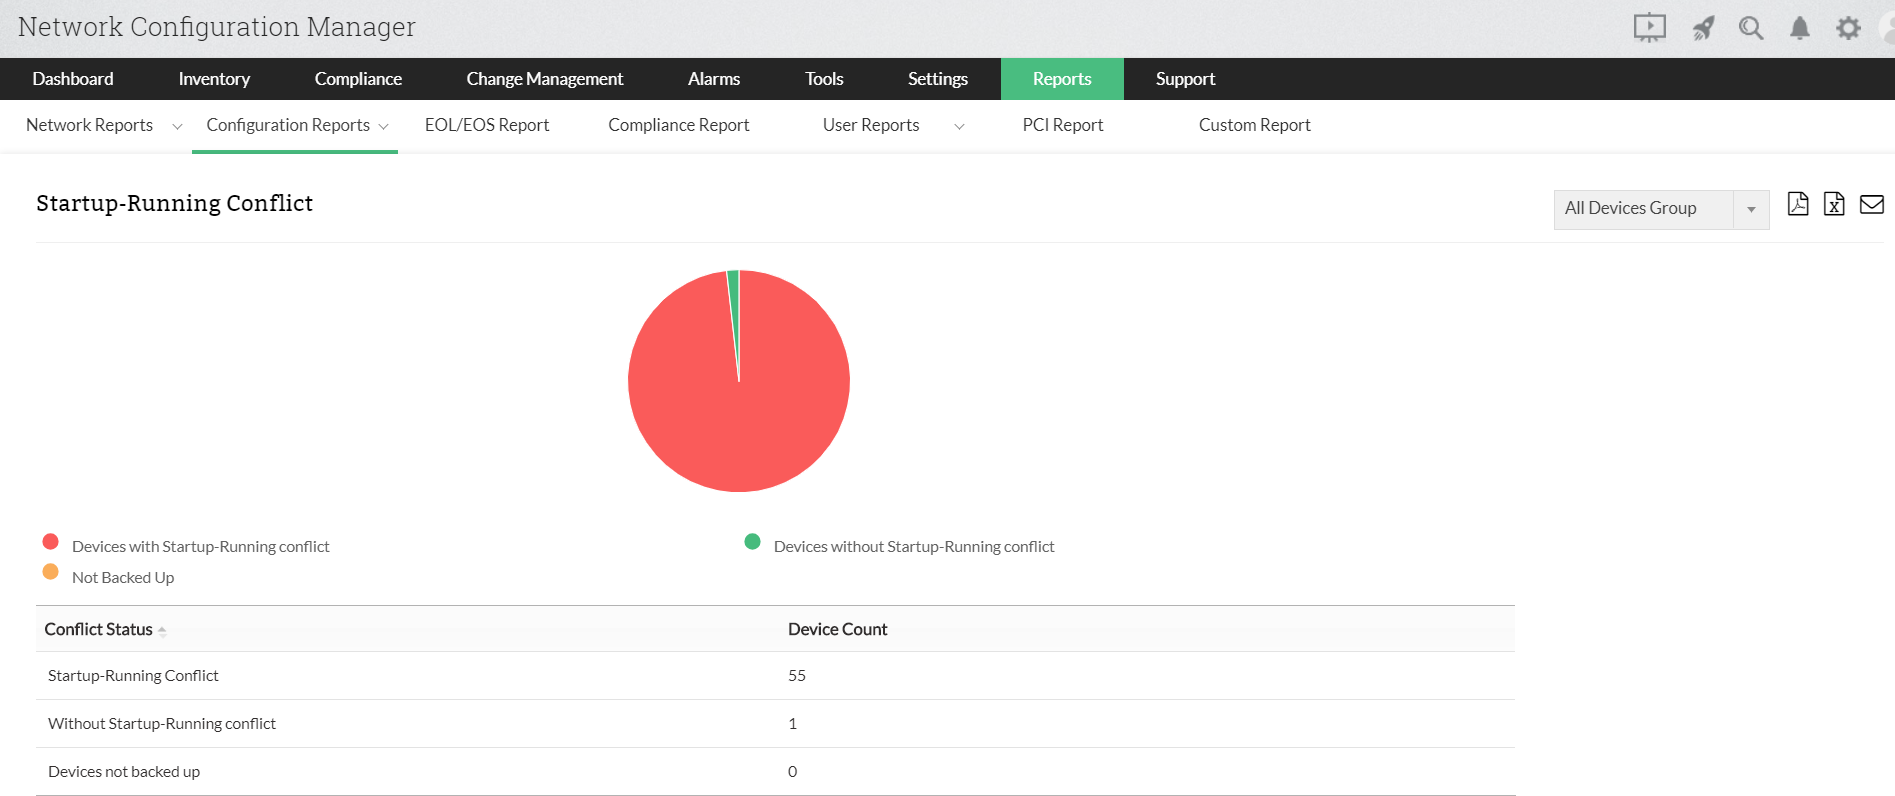 Startup-running configuration conflict reports